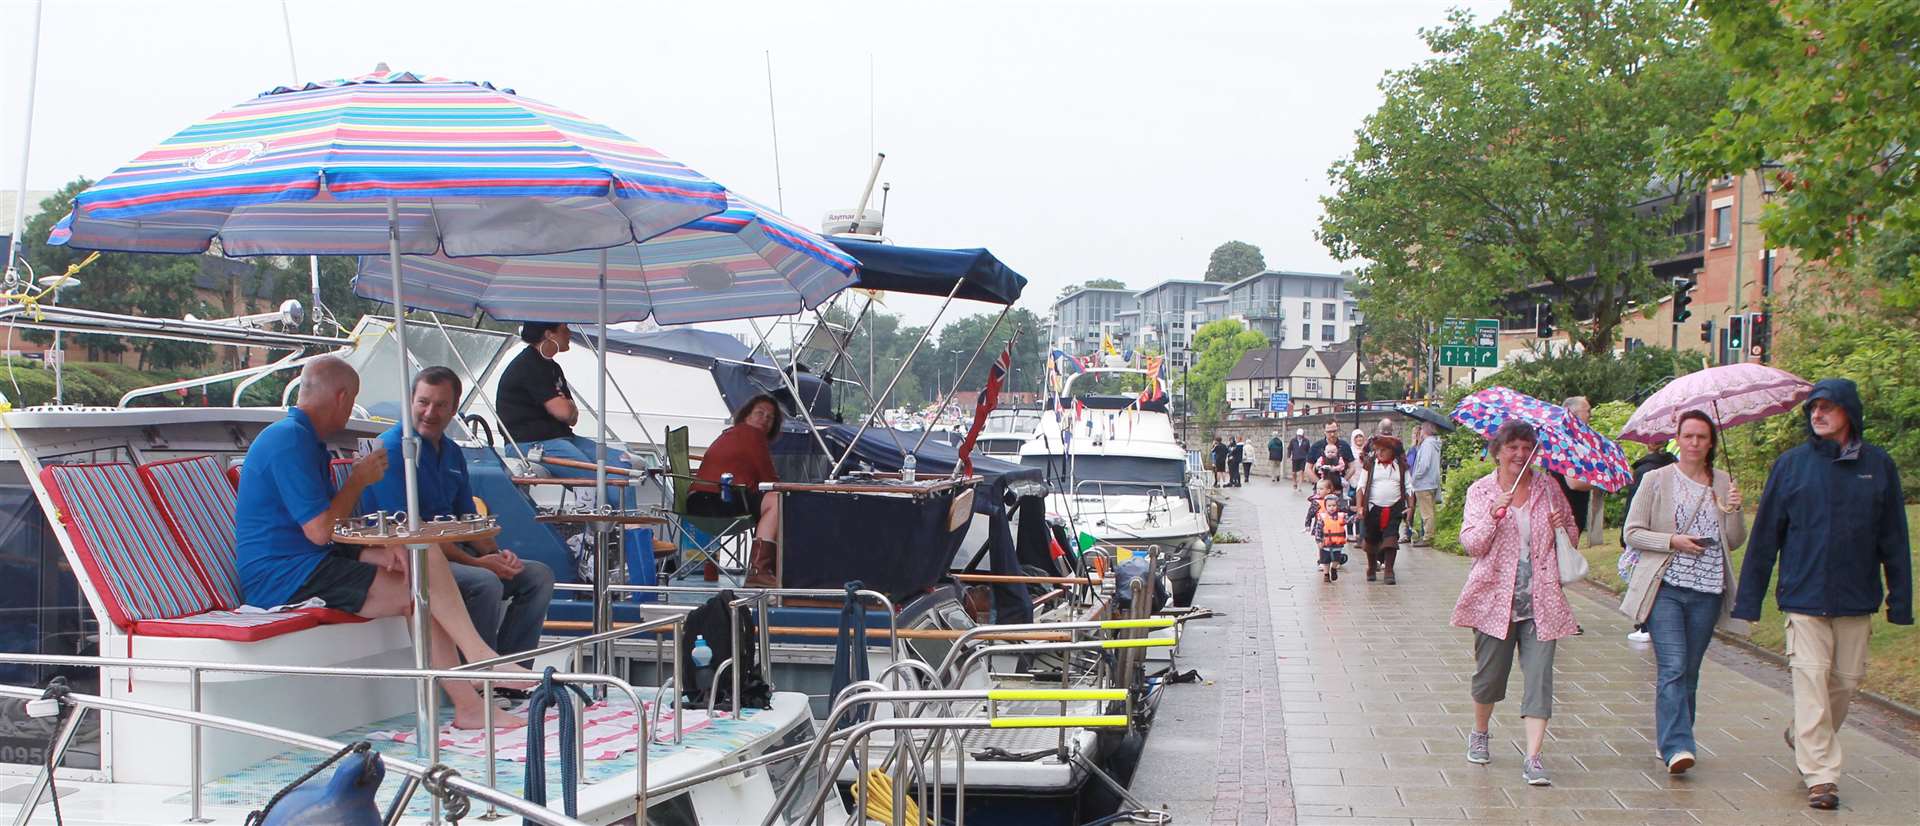 This year's Maidstone River Festival will not be going ahead. Picture: John Westhrop